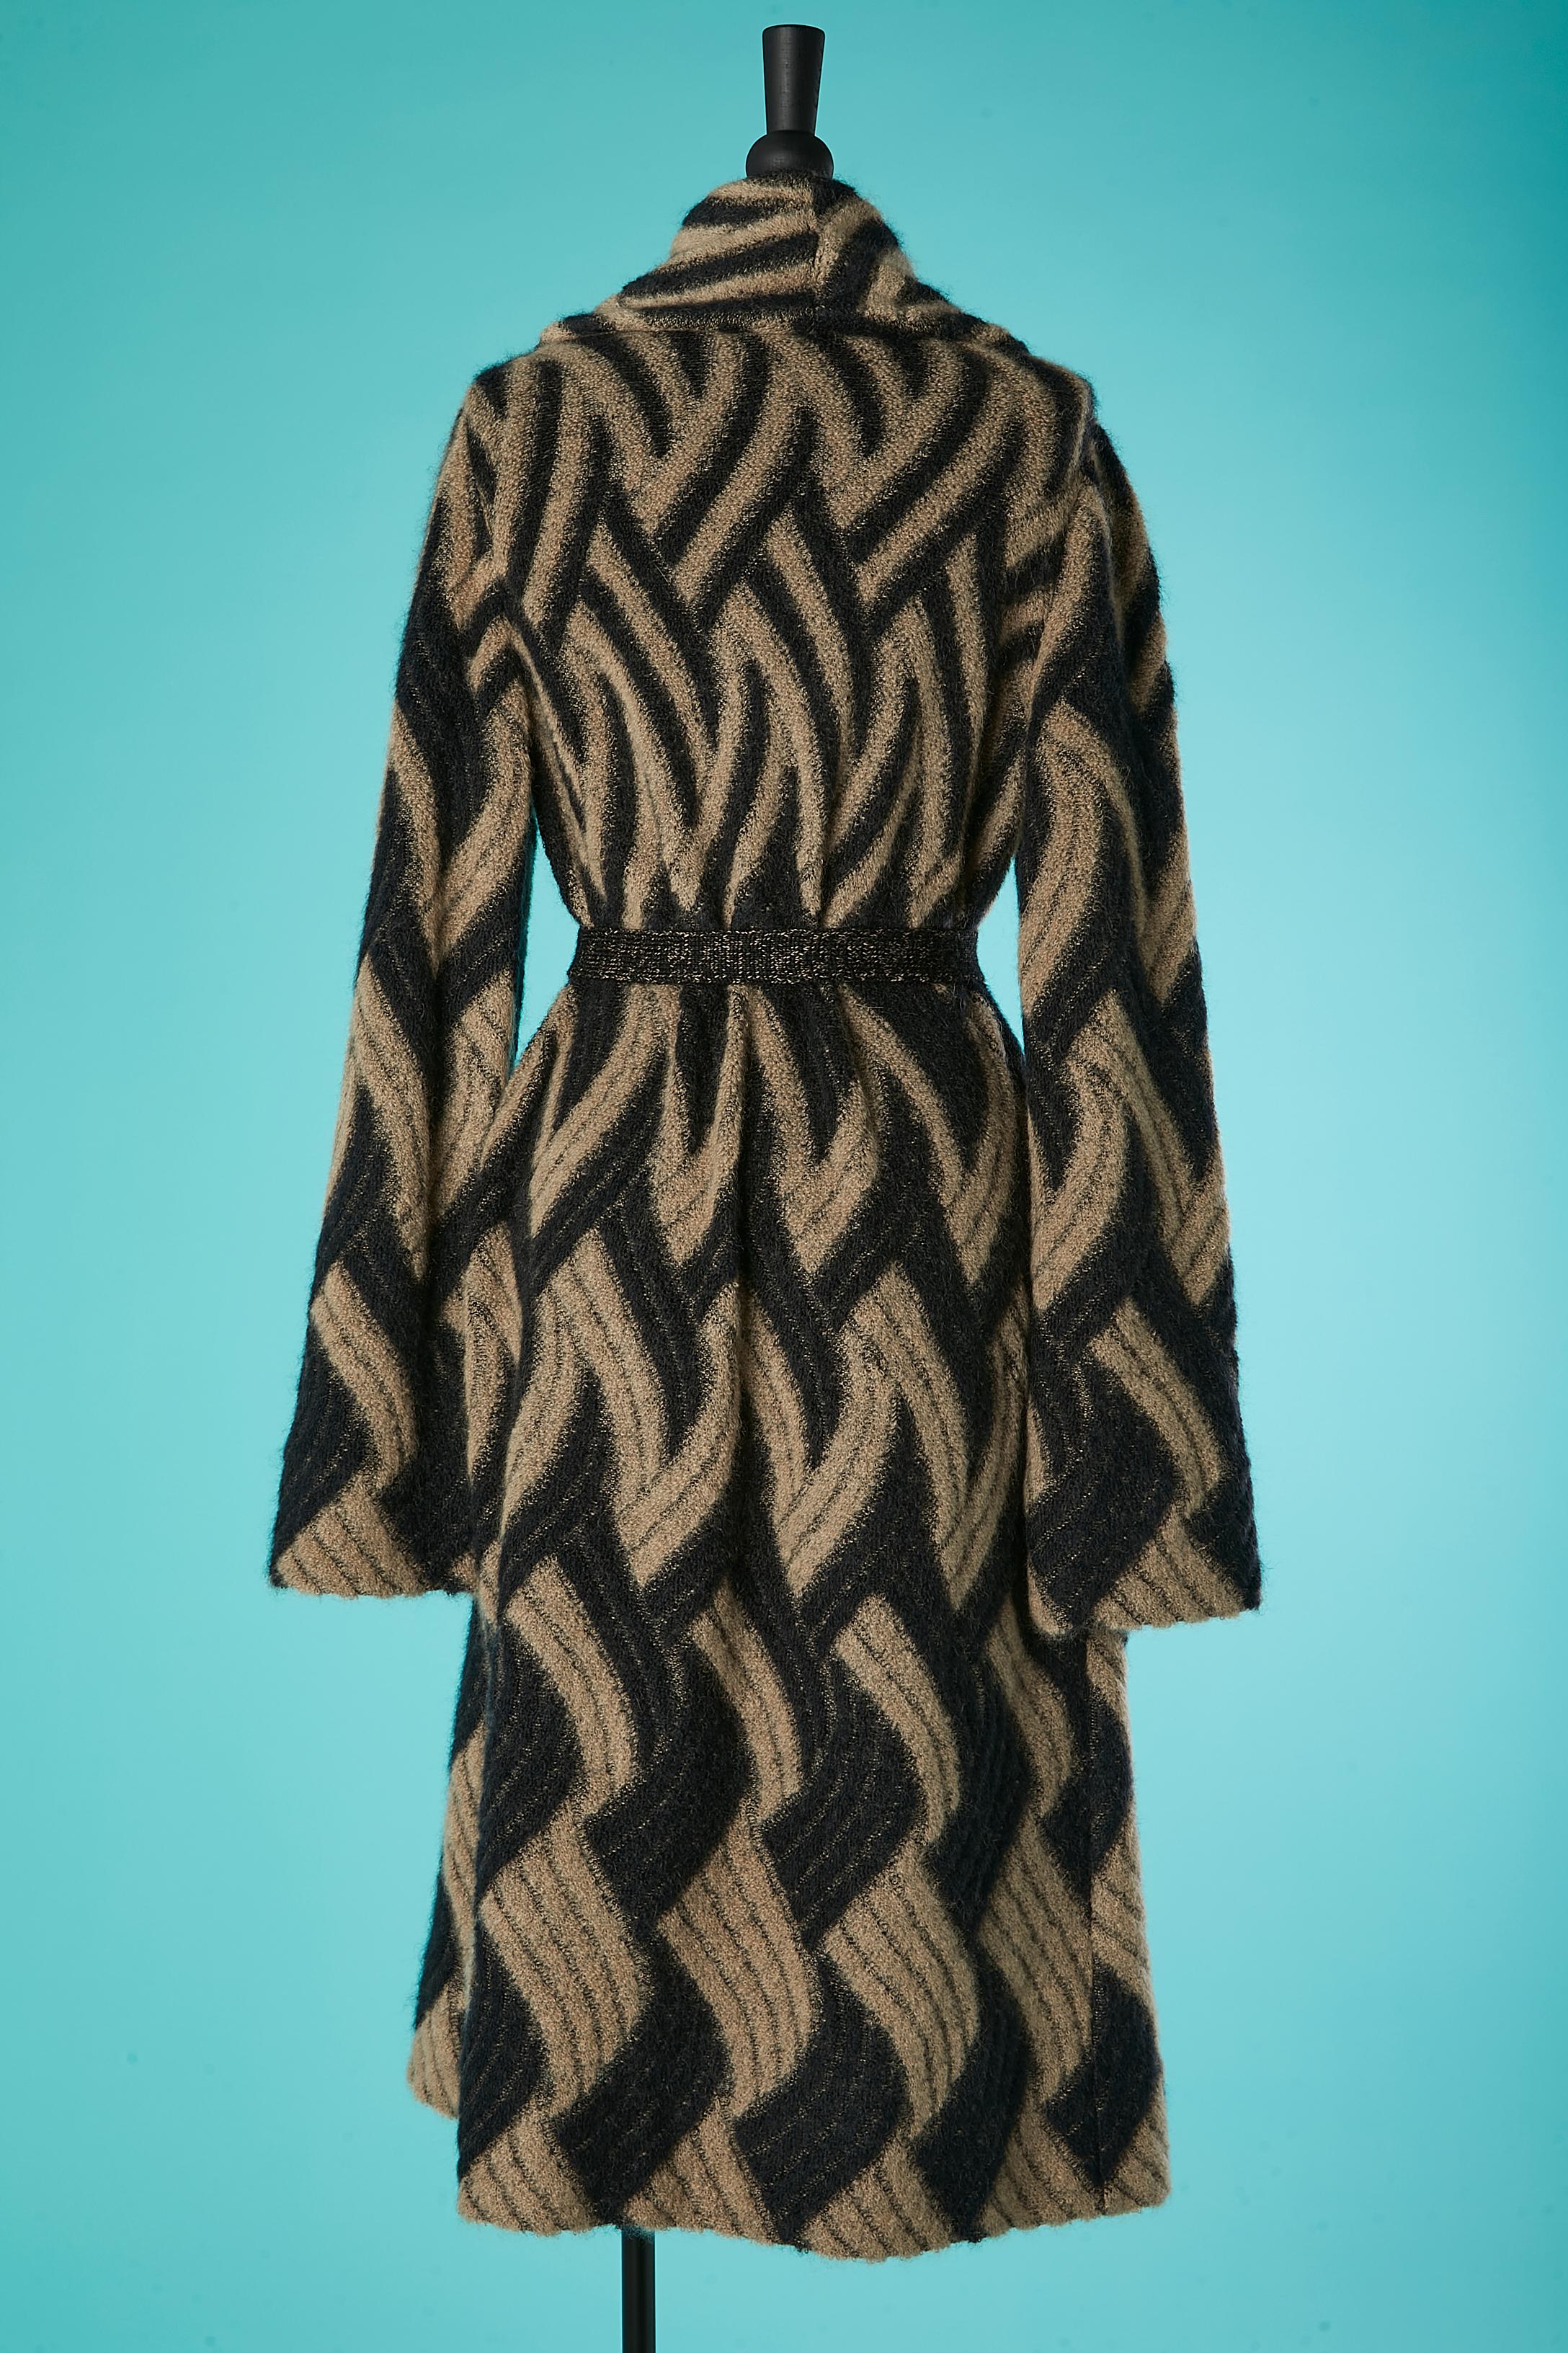 Women's Beige and black jacquard wool and mohair knit coat-cardigan Missoni  For Sale